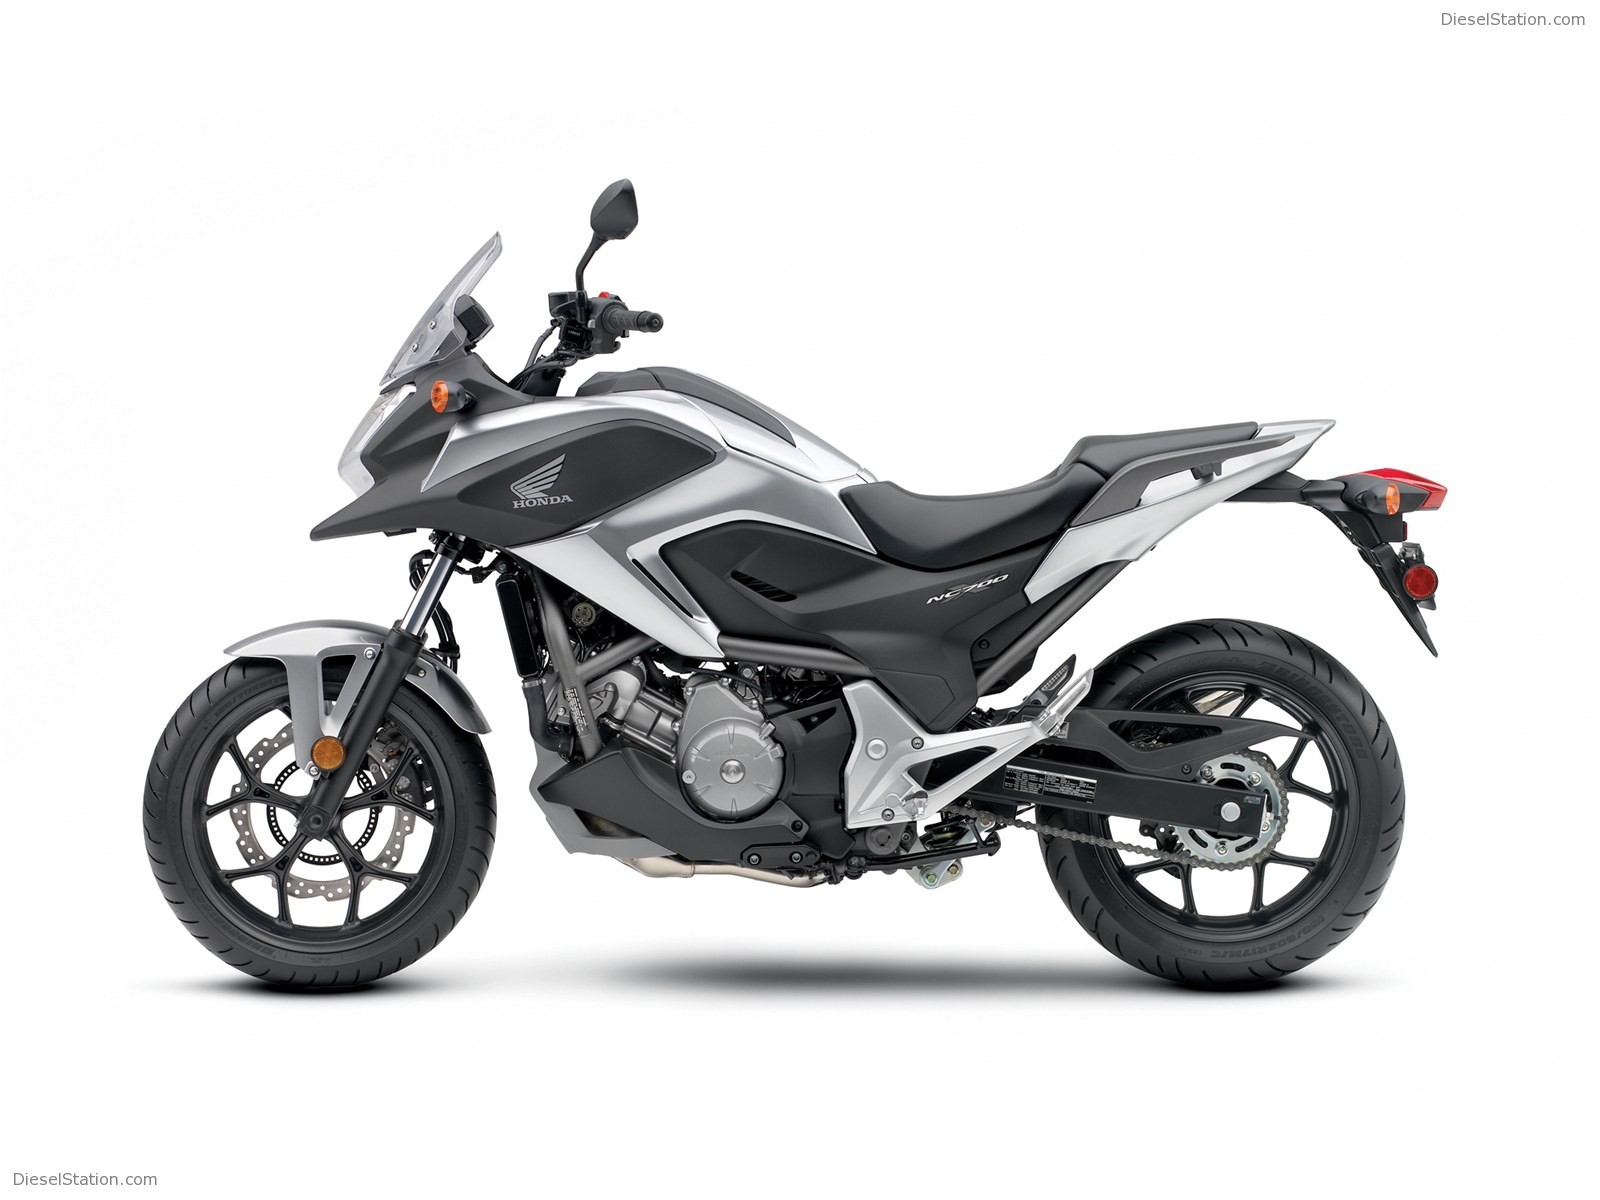 How reliable are honda motorcycles #6